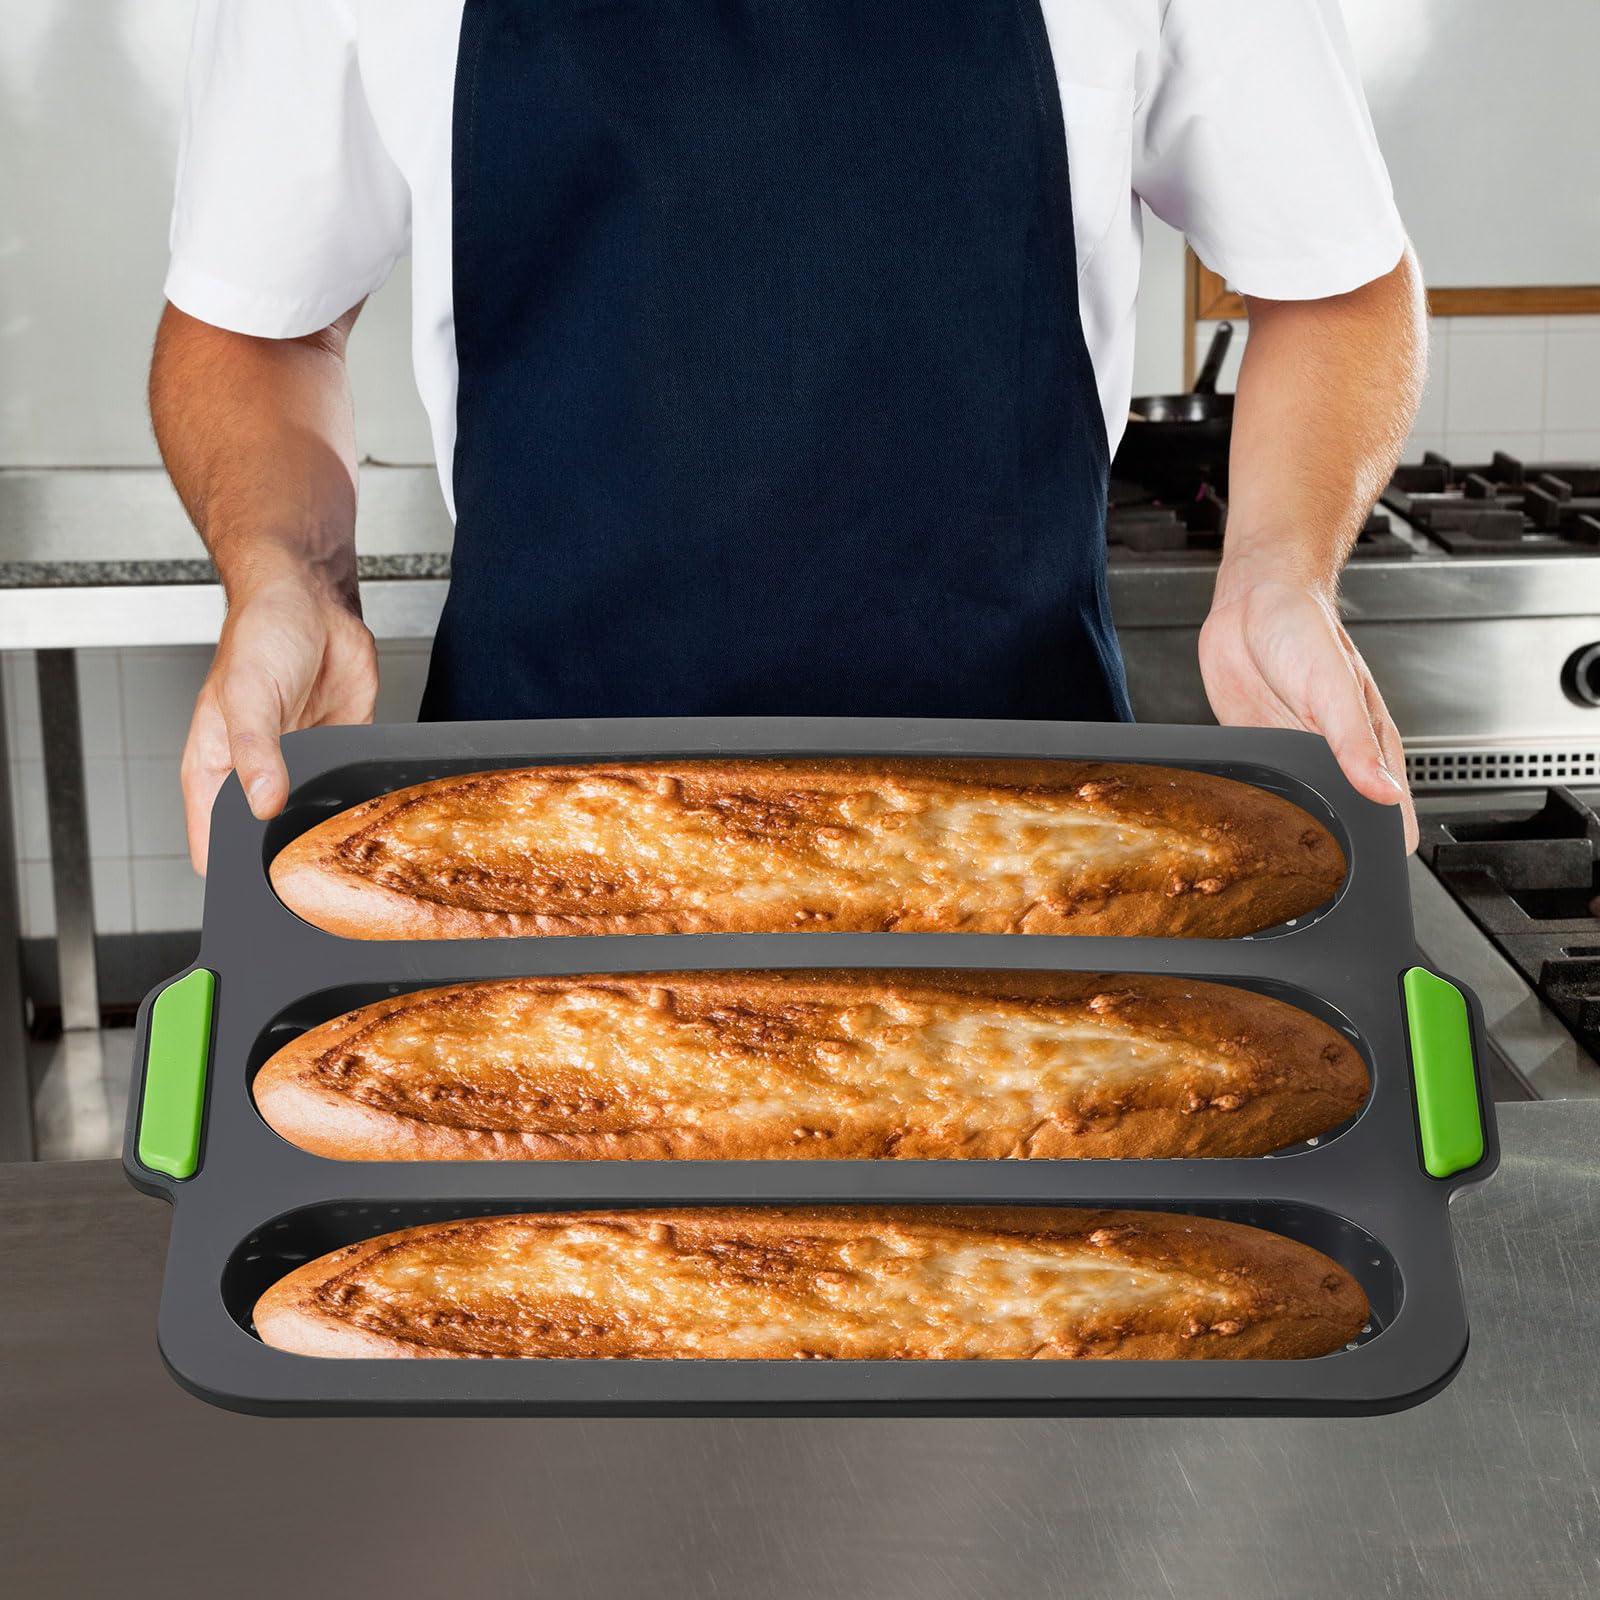 FillTouch Set of 4 Silicone Baguette Pan Baguette Baking Tray 8 Gutter Nonstick Perforated Bread Mold 3 Wave Long Silicone Loaf Pan Homemade French Bread Baking Mould Oven Toast Cooking Bakers - CookCave